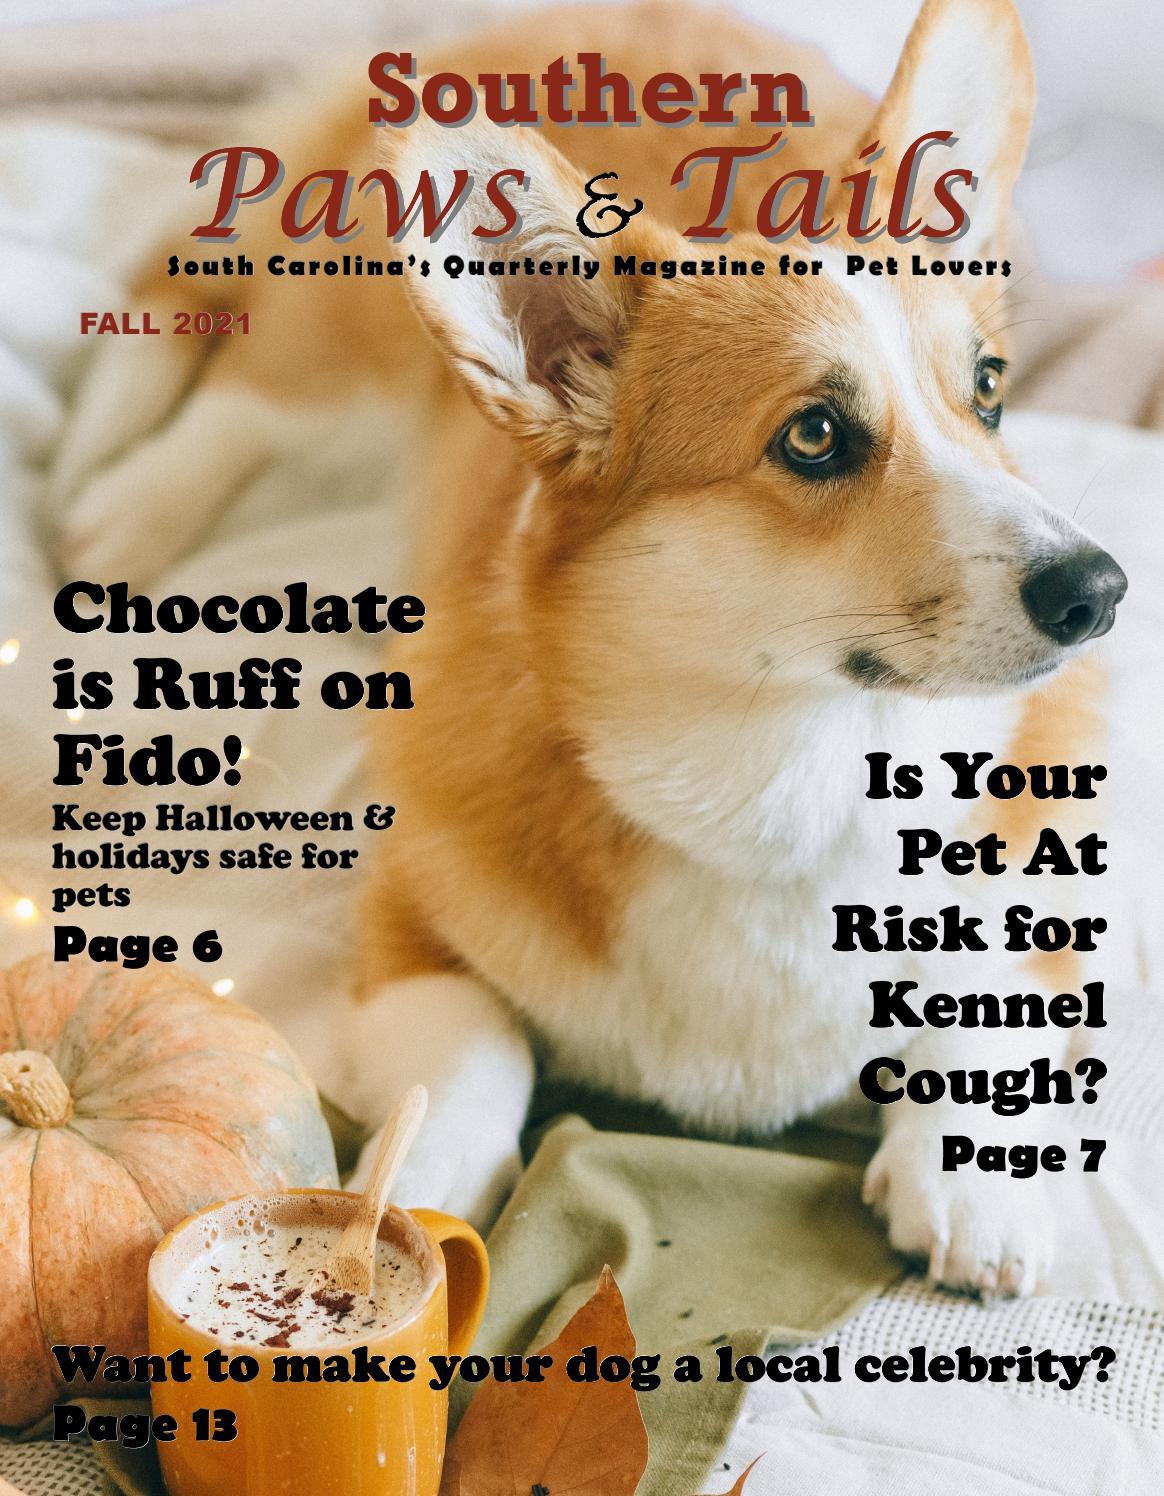 Southern Paws & Tails magazine Fall 2021